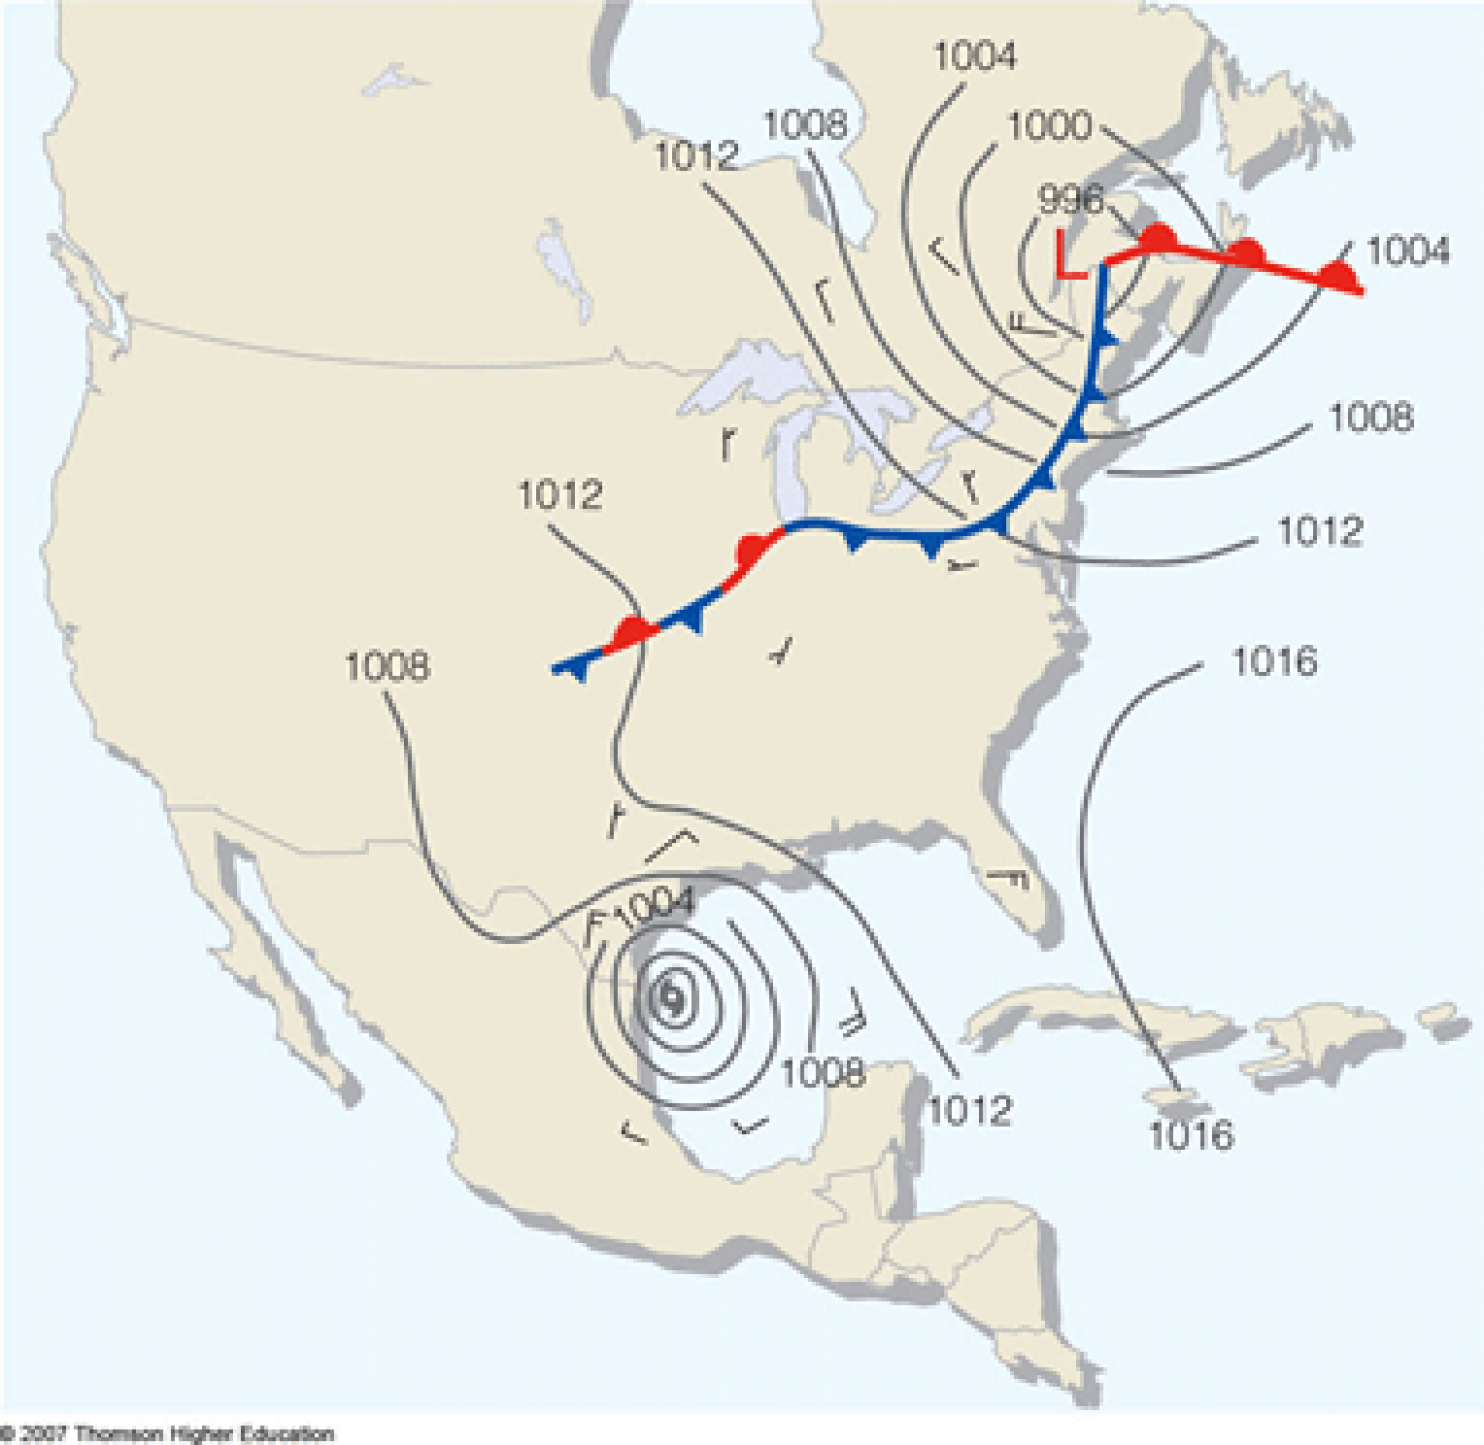 Surface weather map showing a tropical cyclone in the Gulf, and an extra-tropical cyclone in the NE US (Ahrens)